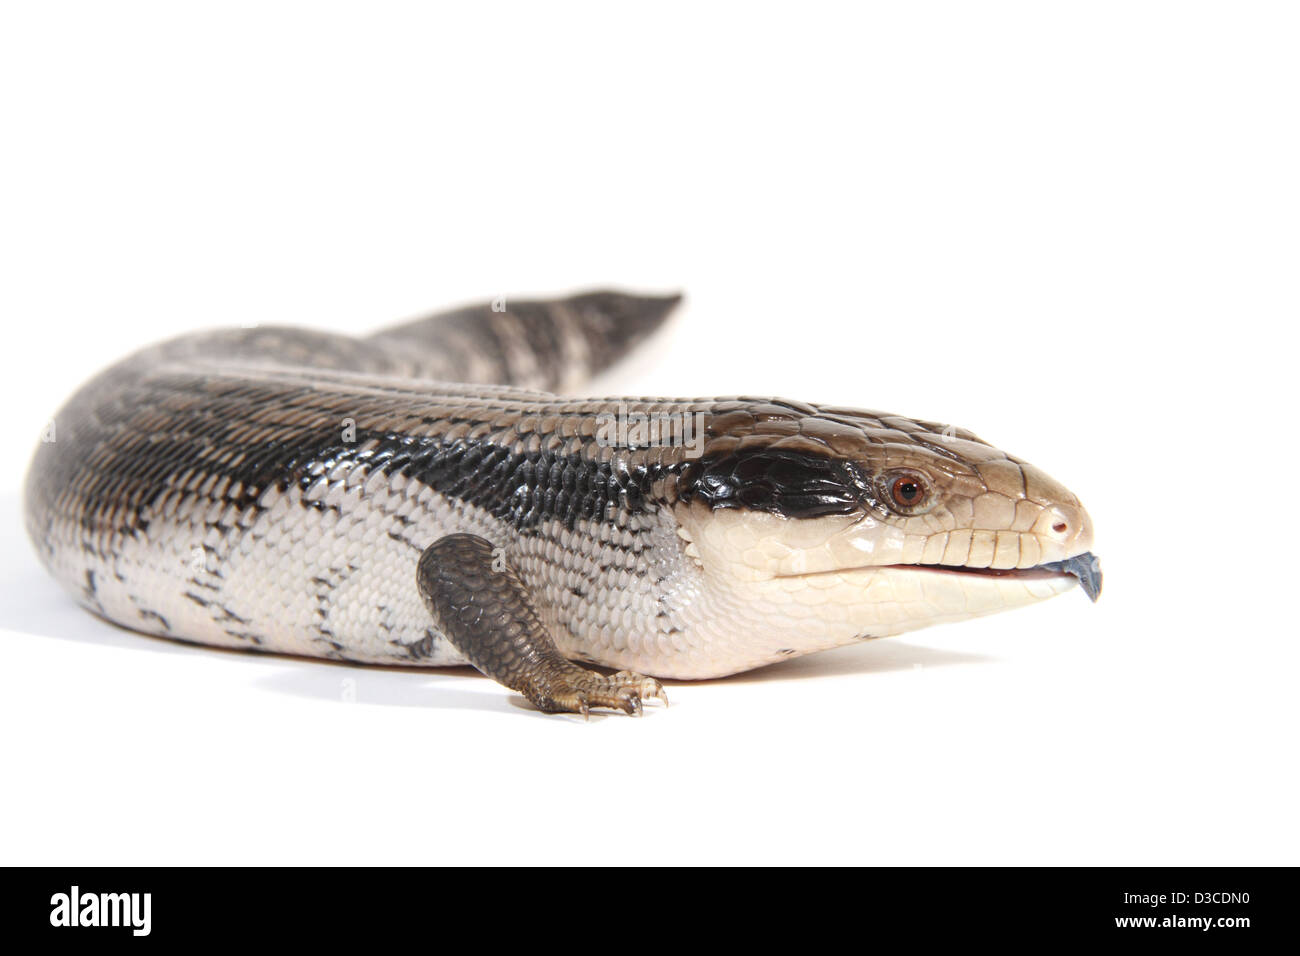 Blue-tongue lizard or skink, Tiliqua scincoides scincoides photographed in a studio suitable for cut-out Stock Photo